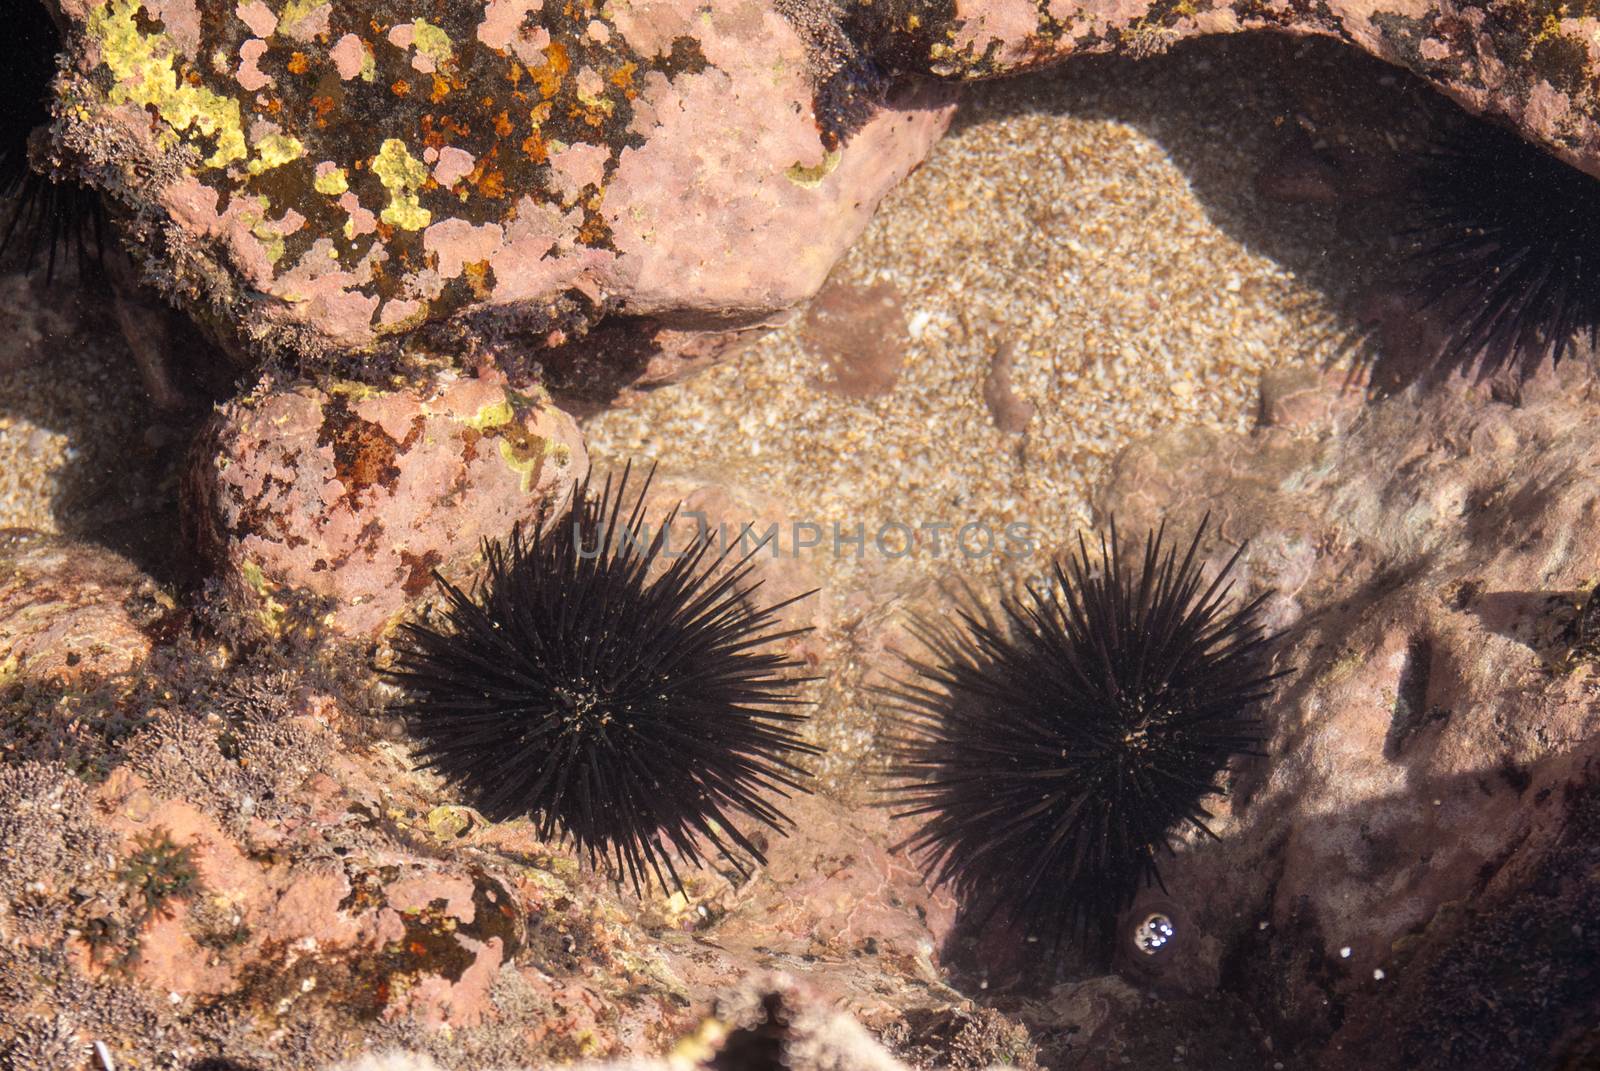 Sea Urchins in tide pool on Mexican Coast